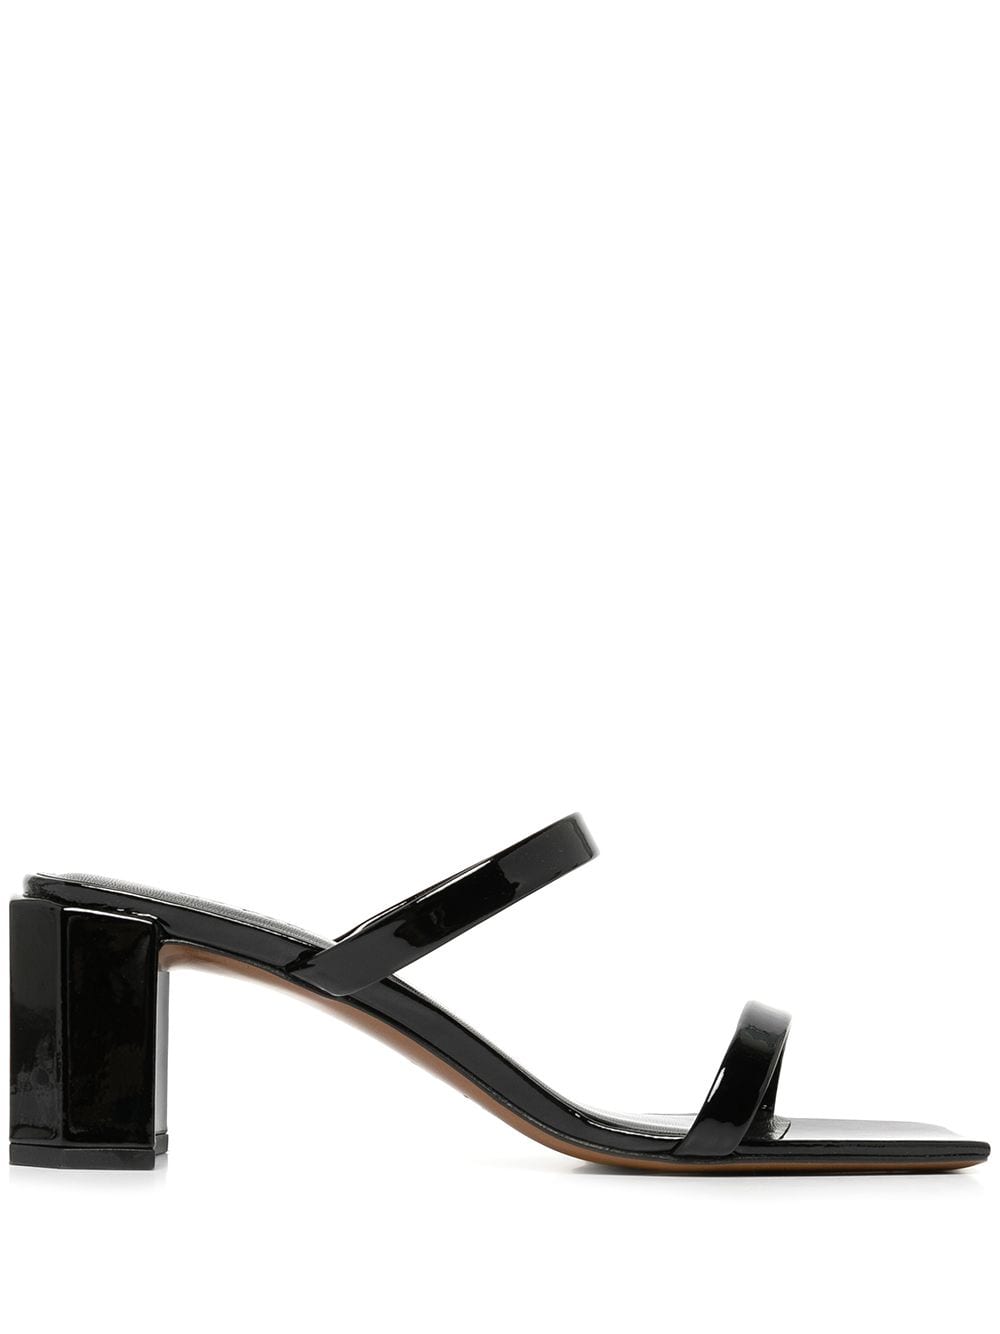 BY FAR Tanya patent leather sandals - Black von BY FAR